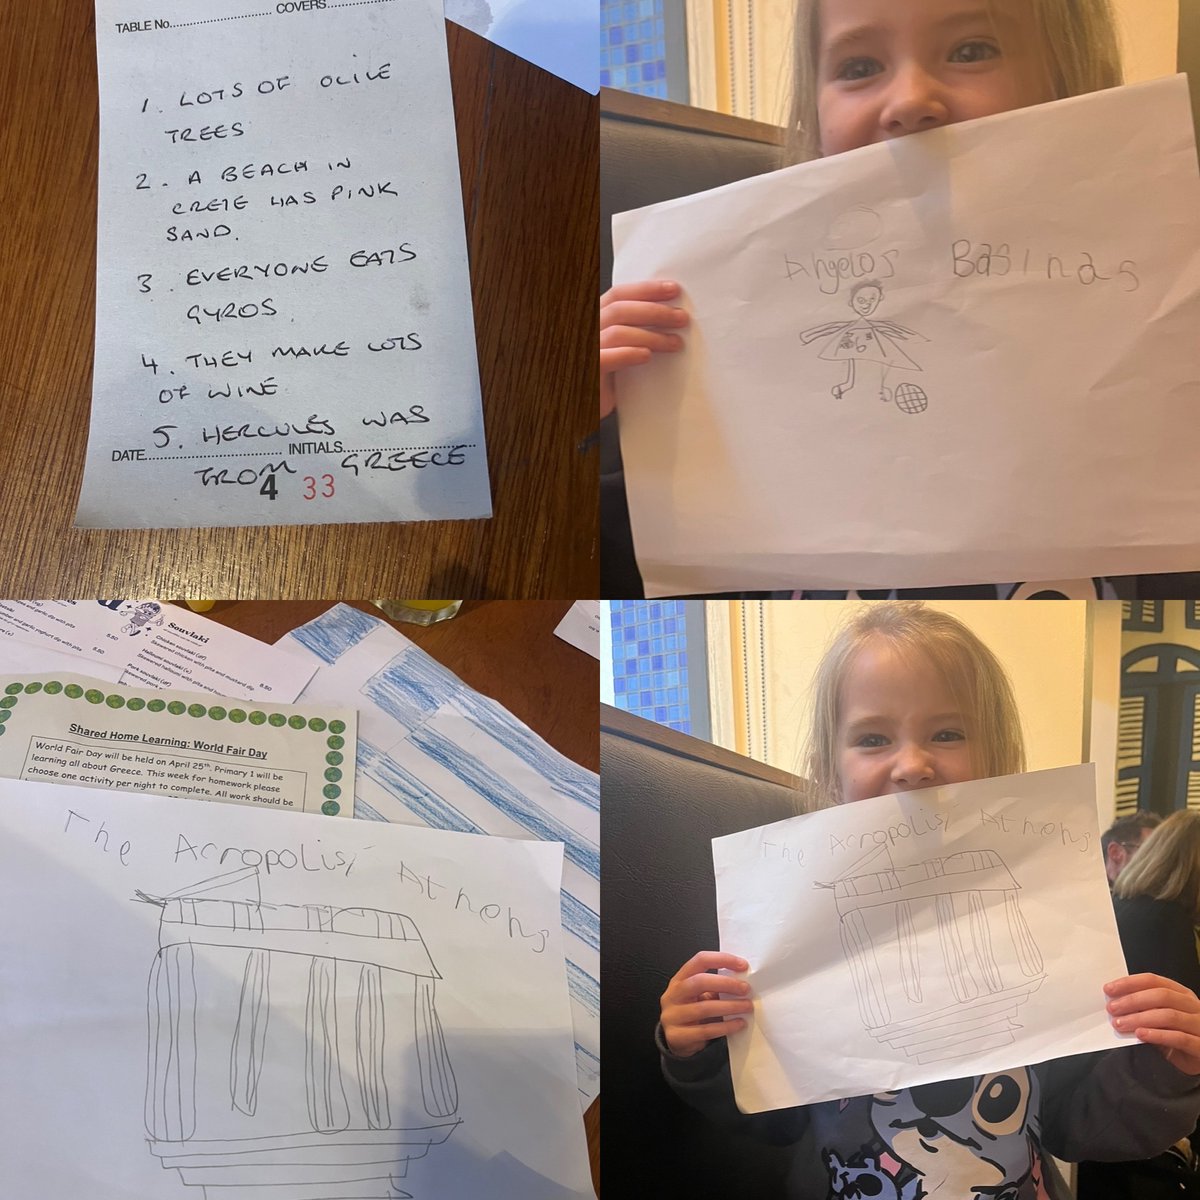 Aria was learning lots of amazing facts about Greece from her Auntie Stasica. She visited her restaurant and got lovely Greek food and Juice.🇬🇷@MrsMcGMrsJ_CCPS #sharedhomelearning #worldfairday #Greece